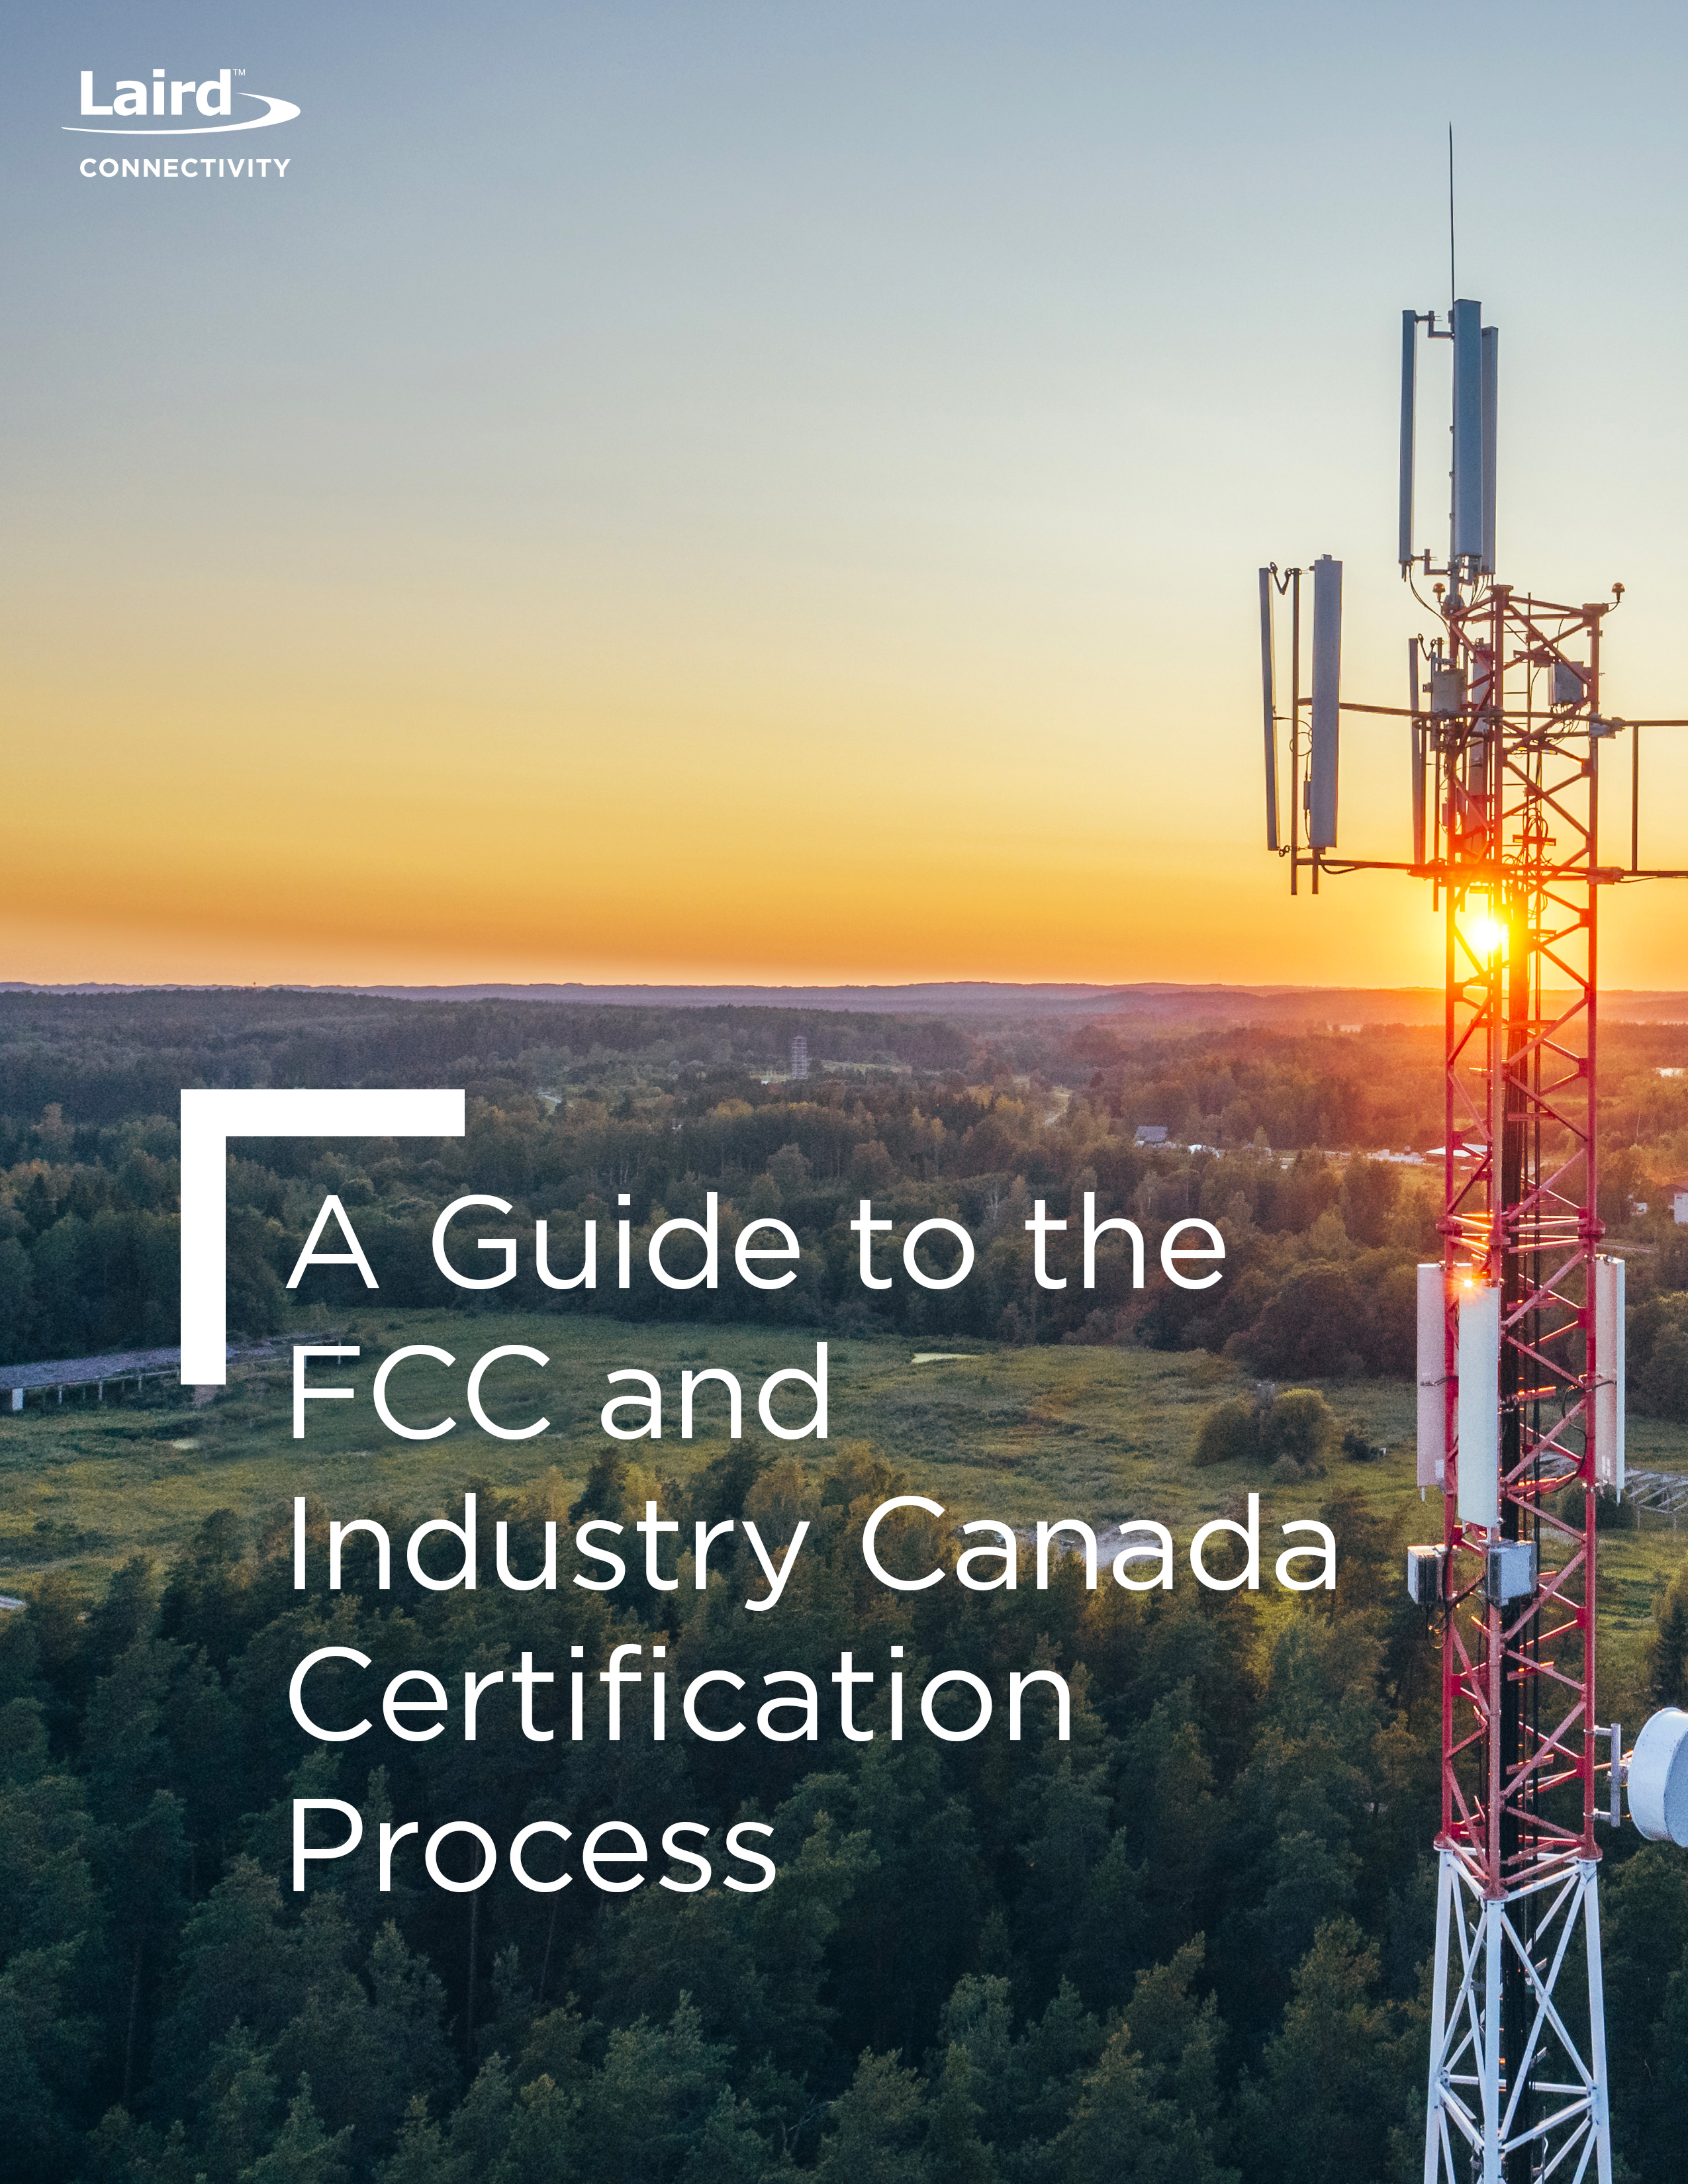 A Guide to the FCC and Industry Canada Certification Process